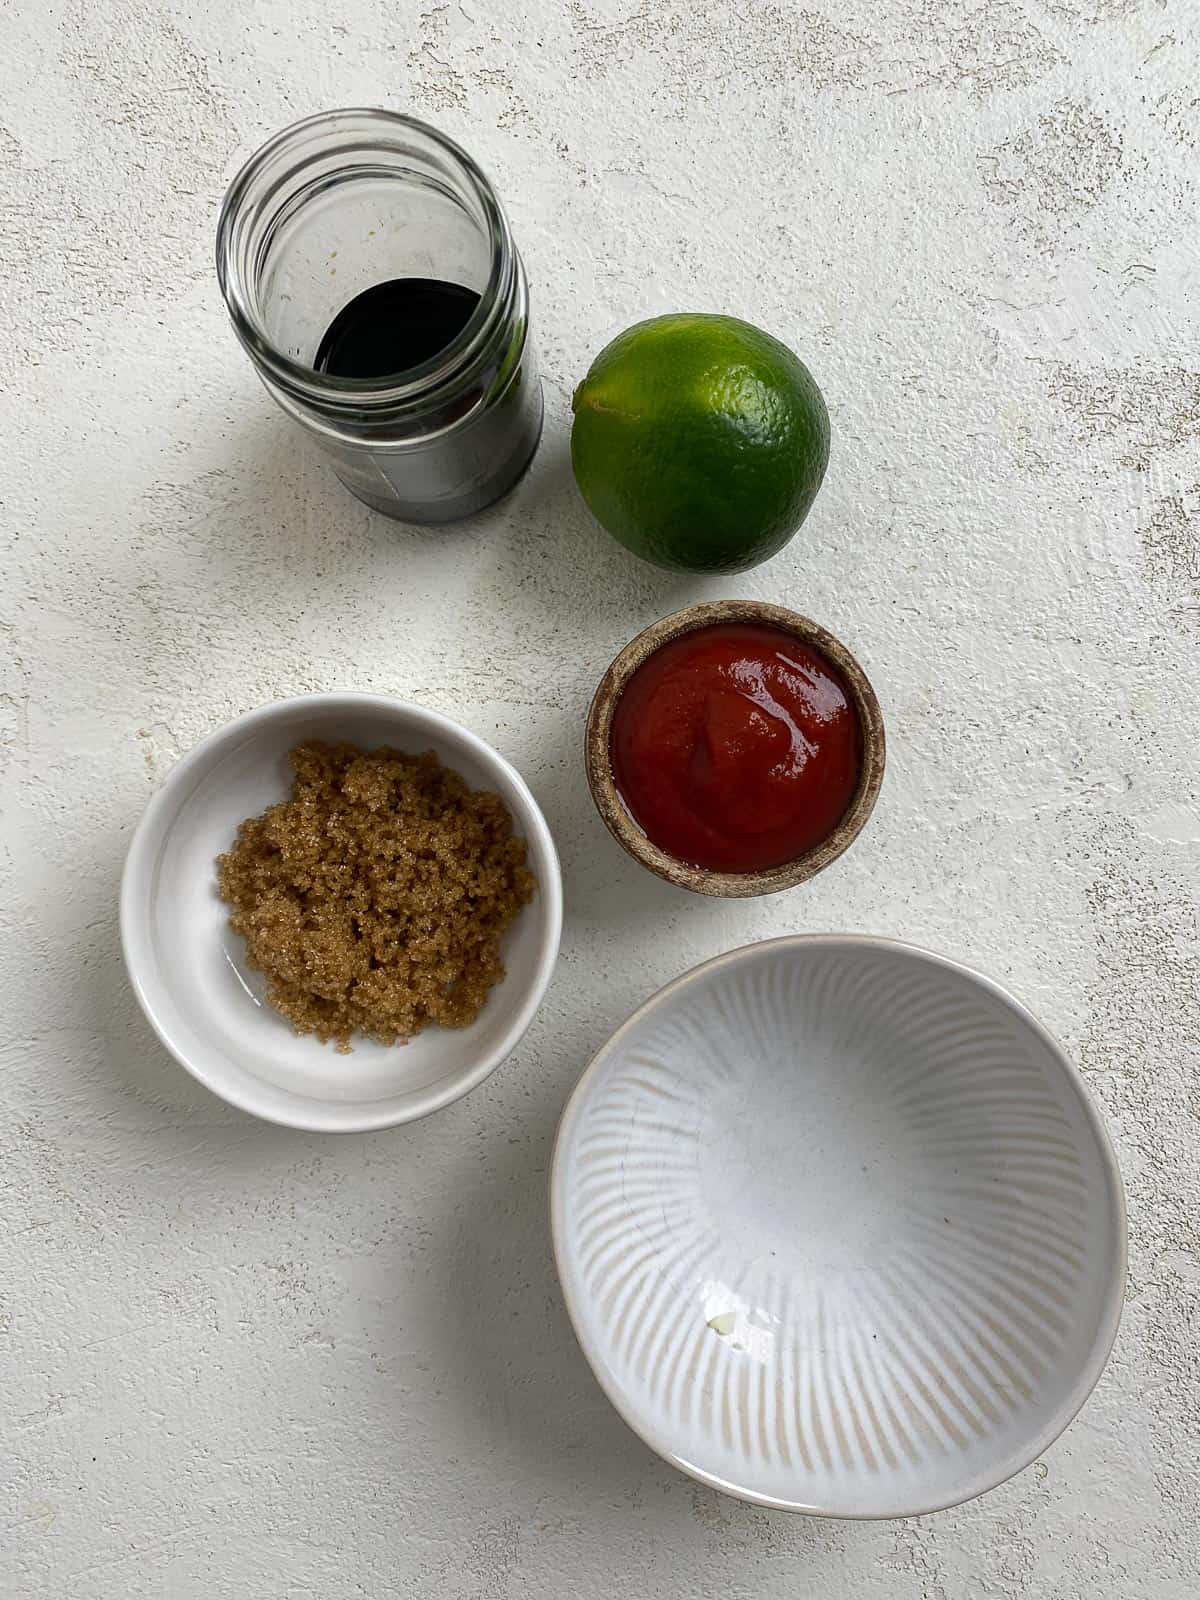 ingredients for sauce measured out in bowls against a white surface